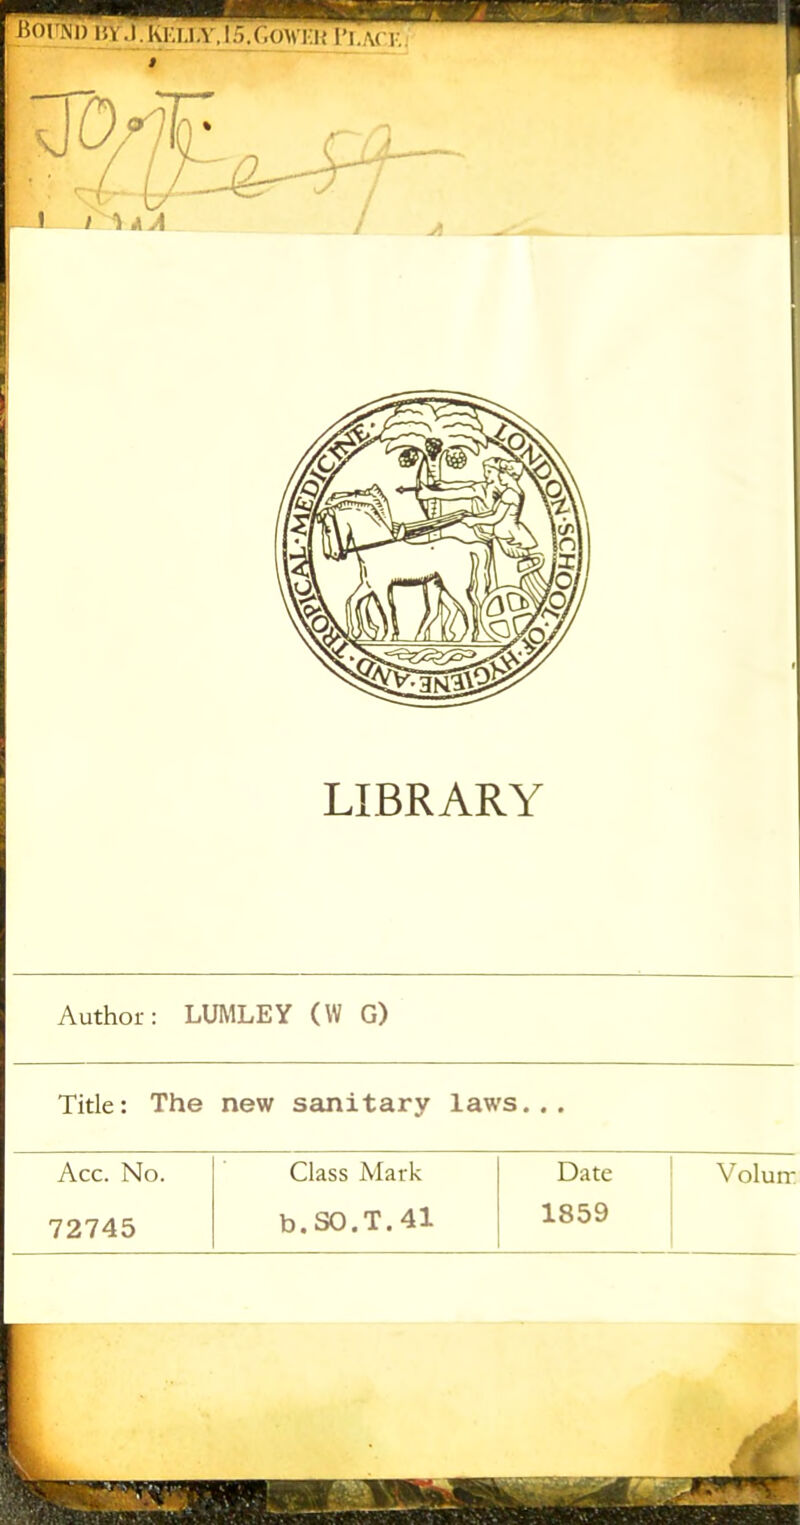 LIBRARY Author: LUMLEY (W G) Title: The new sanitary laws... Acc. No. Class Mark Date V oluir 72745 b. SO.T. 41 1859